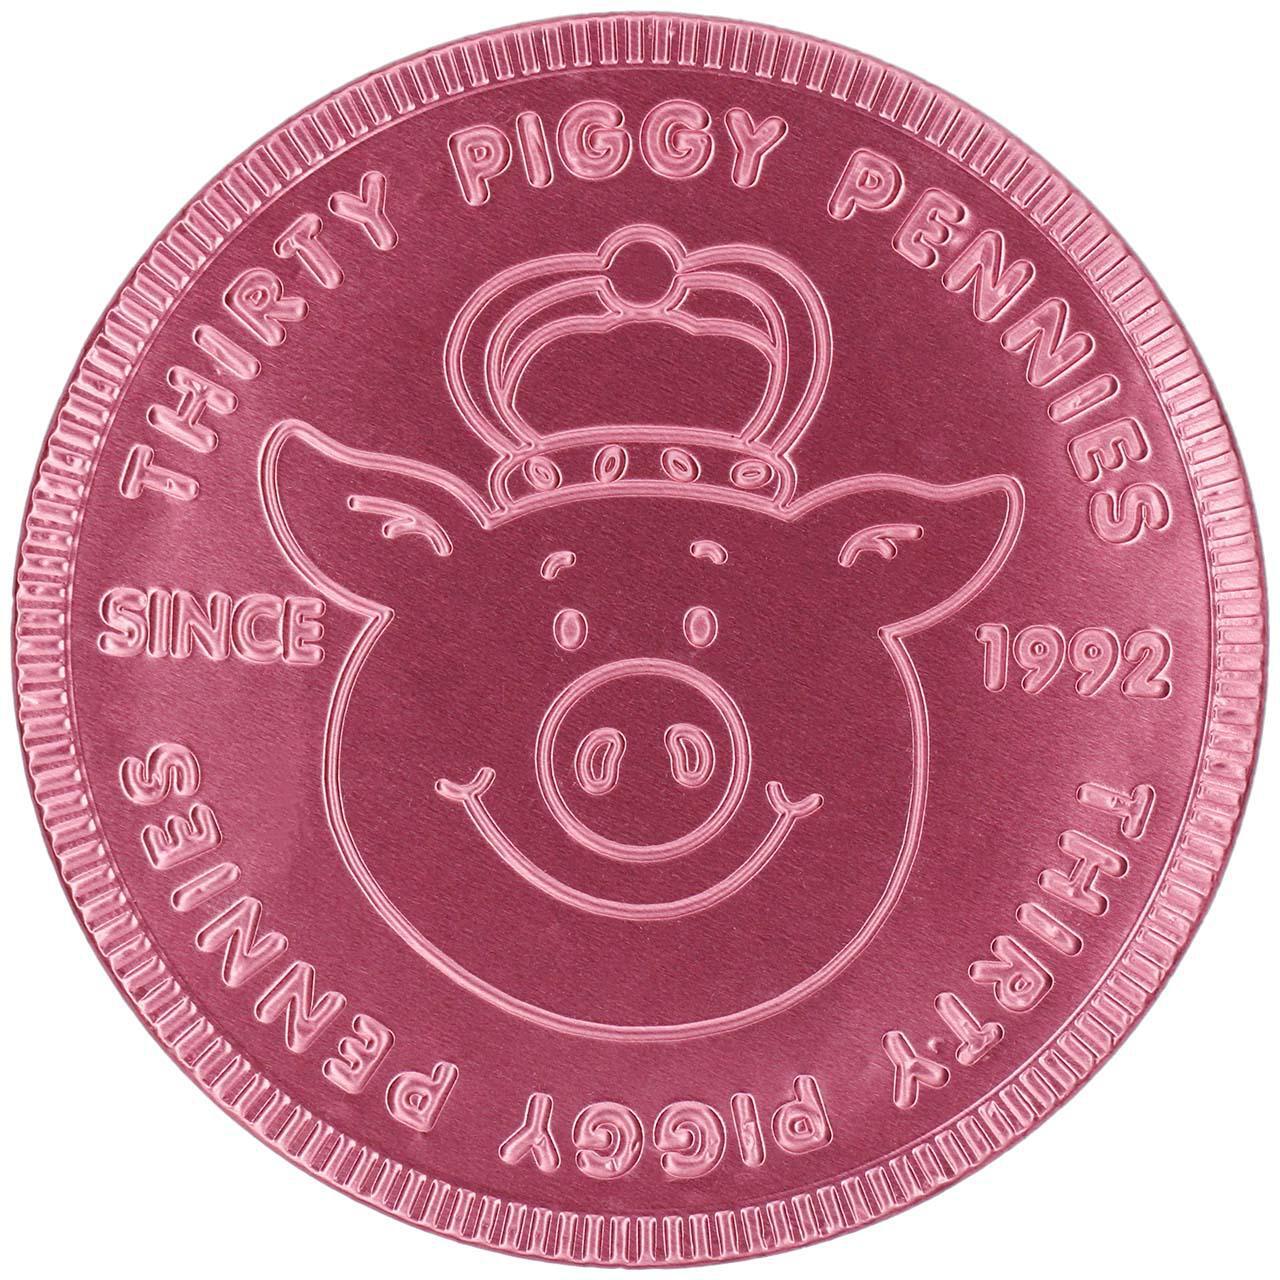 M&S Giant Percy Pig Coin 90g